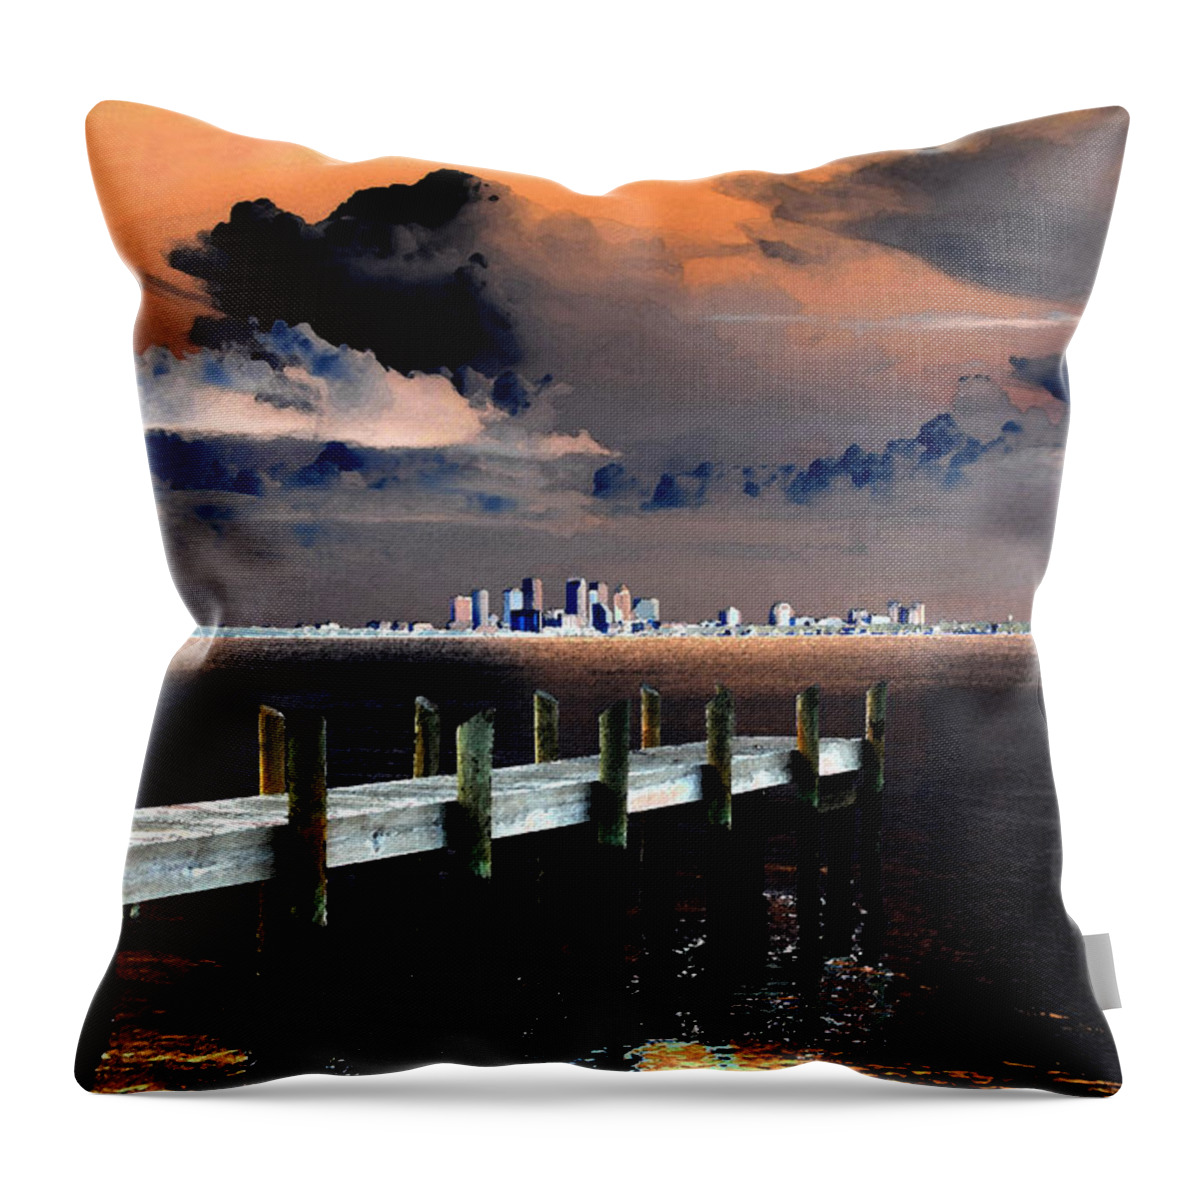 Art Throw Pillow featuring the painting Ballast Point by David Lee Thompson